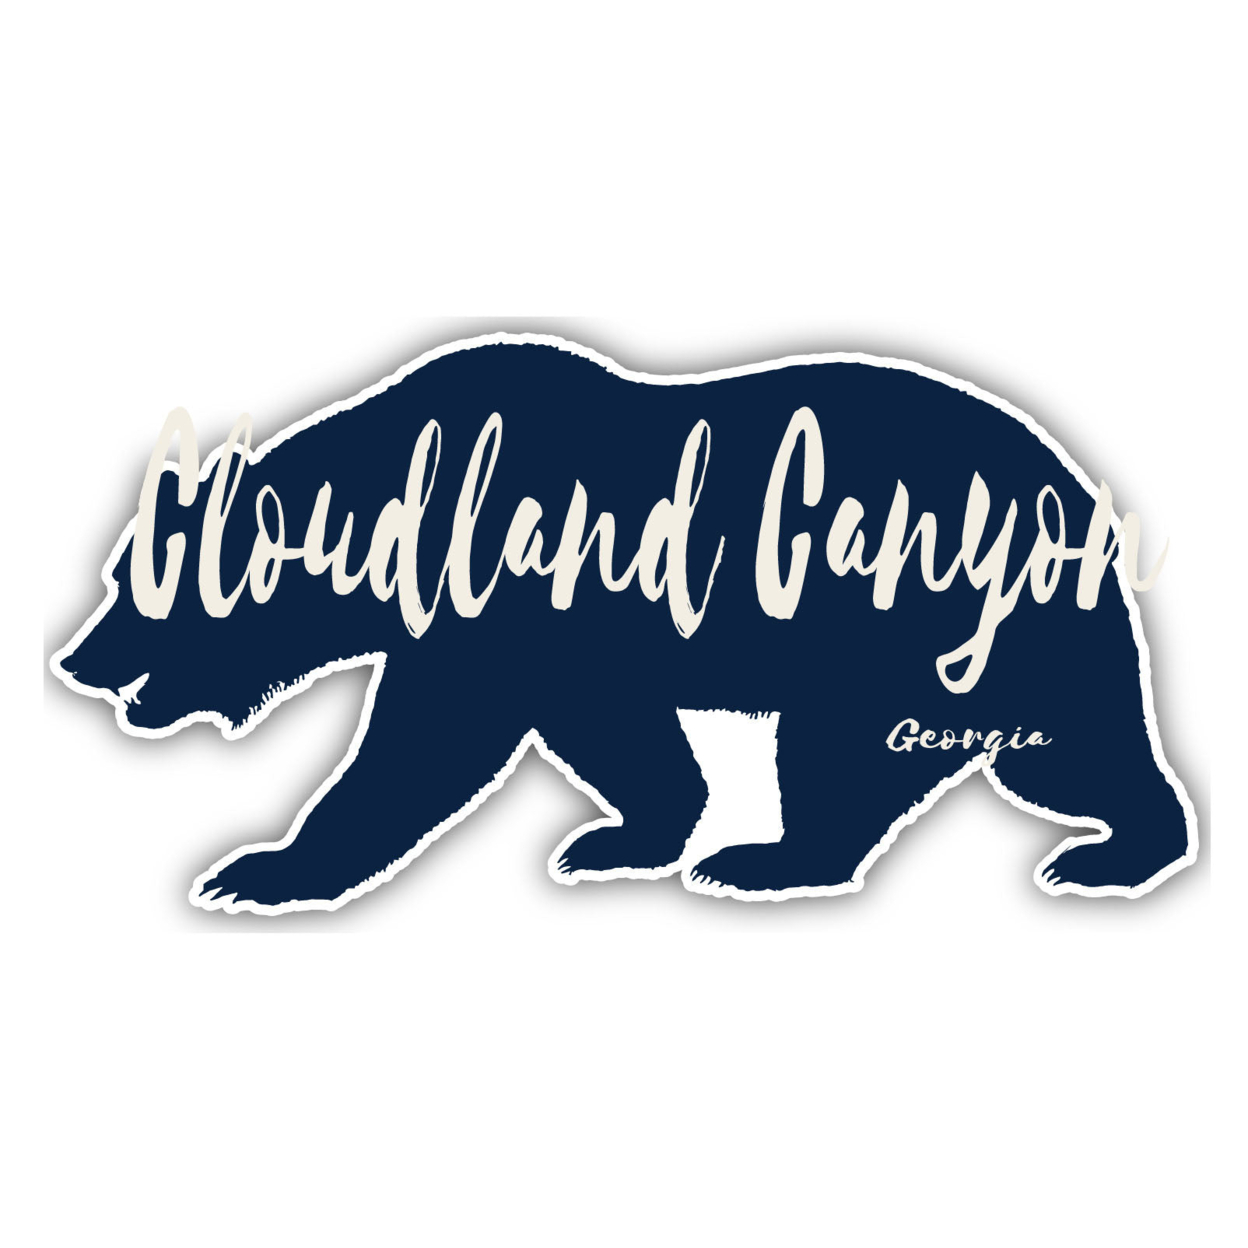 Cloudland Canyon Georgia Souvenir Decorative Stickers (Choose Theme And Size) - 4-Pack, 12-Inch, Camp Life